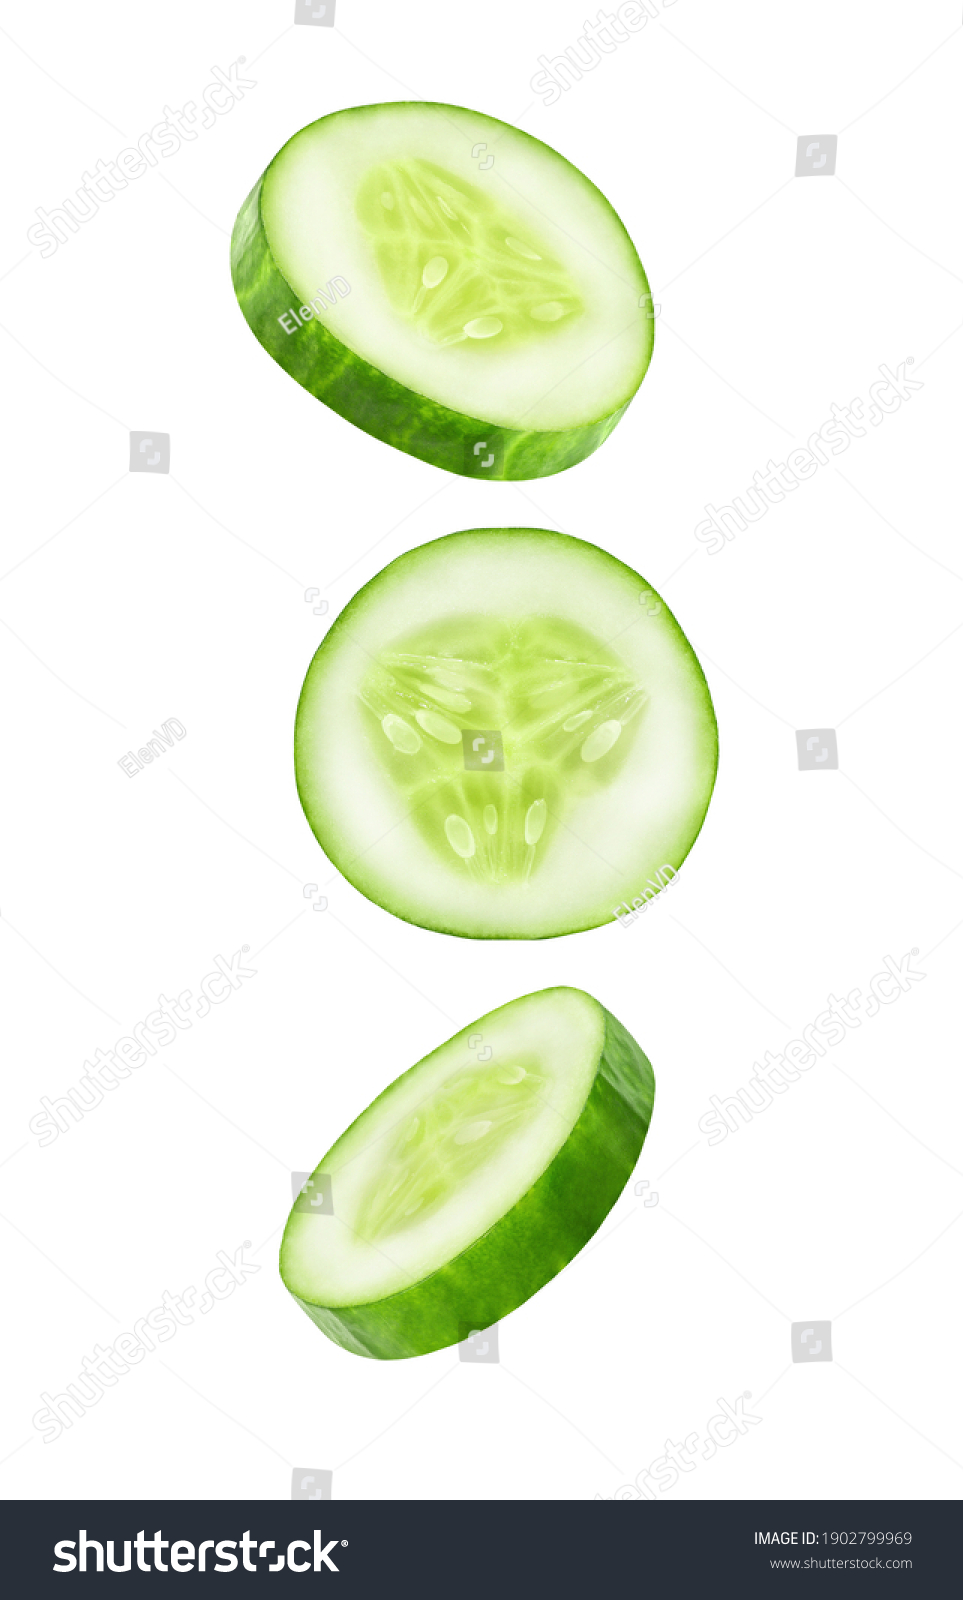 Cucumber slices falling, hanging, flying, soaring isolated on a white background with clipping path. Full depth of field. #1902799969